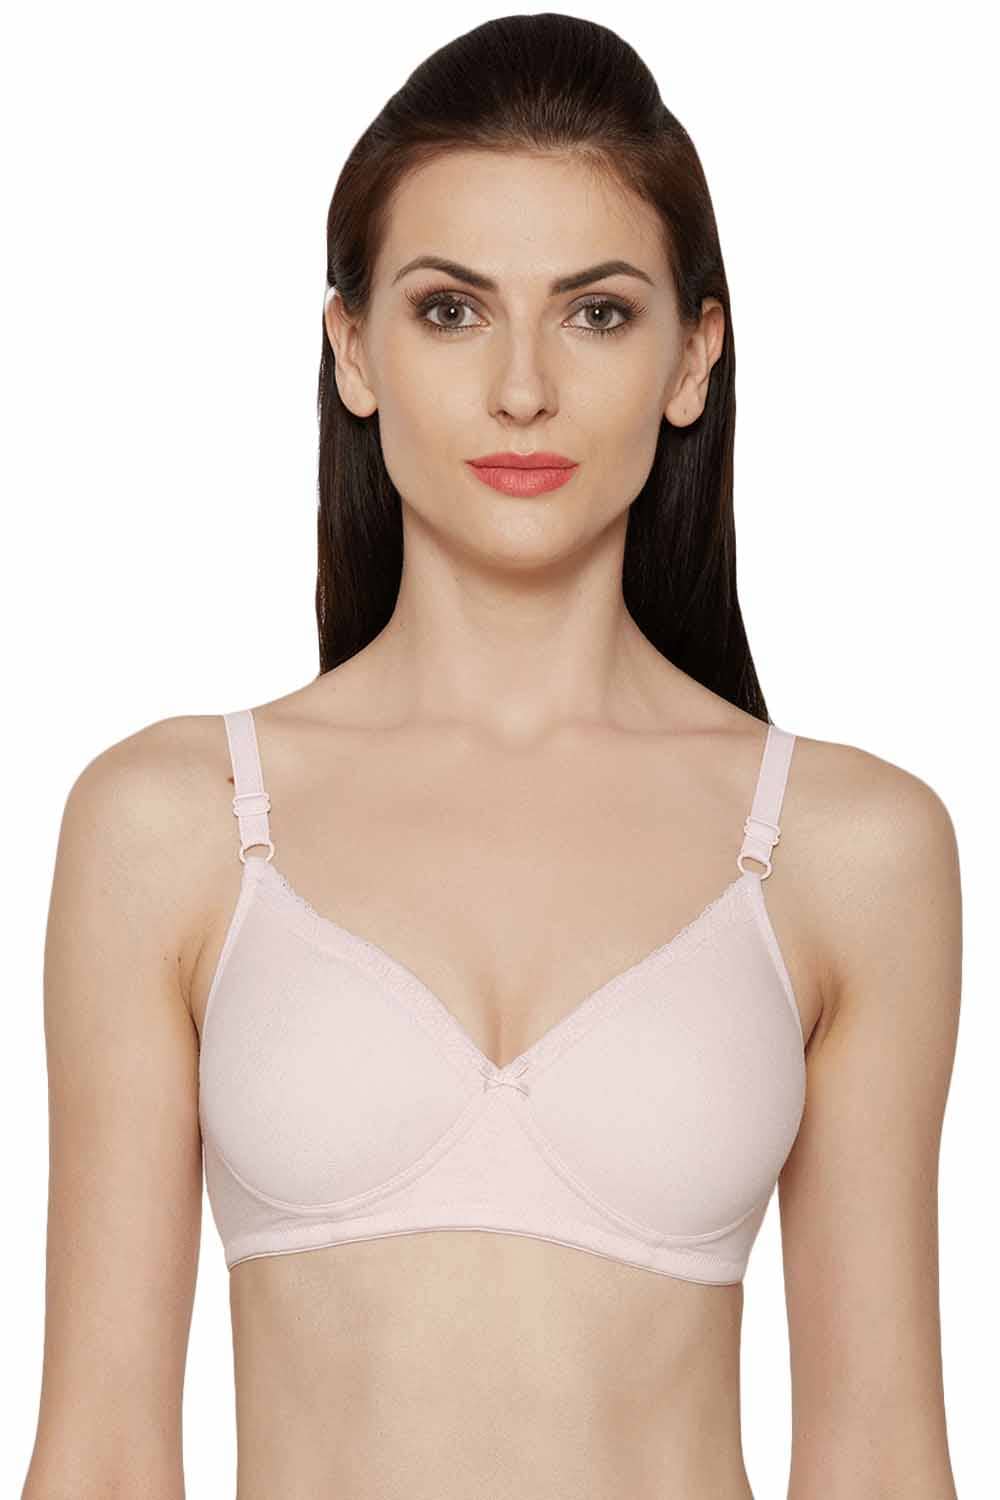 Organic Cotton  Antimicrobial Padded Non-wired Lace touch T-shirt Bra-ISB067-